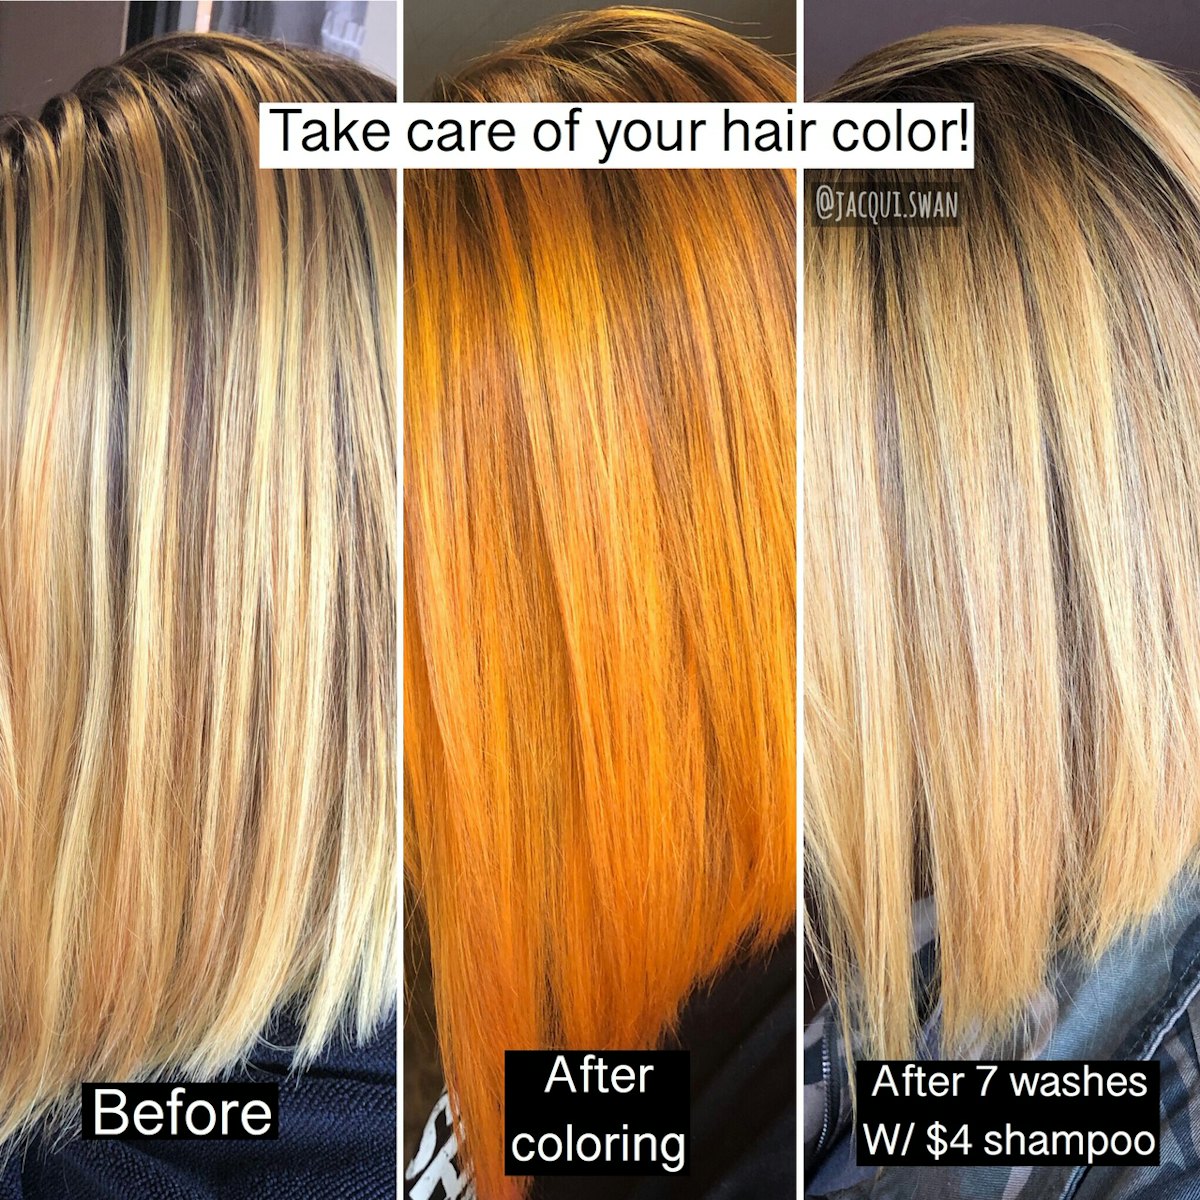 Hairstylist Uses Drugstore Shampoo for a Week and the Results are Dramatic  | Beauty Launchpad